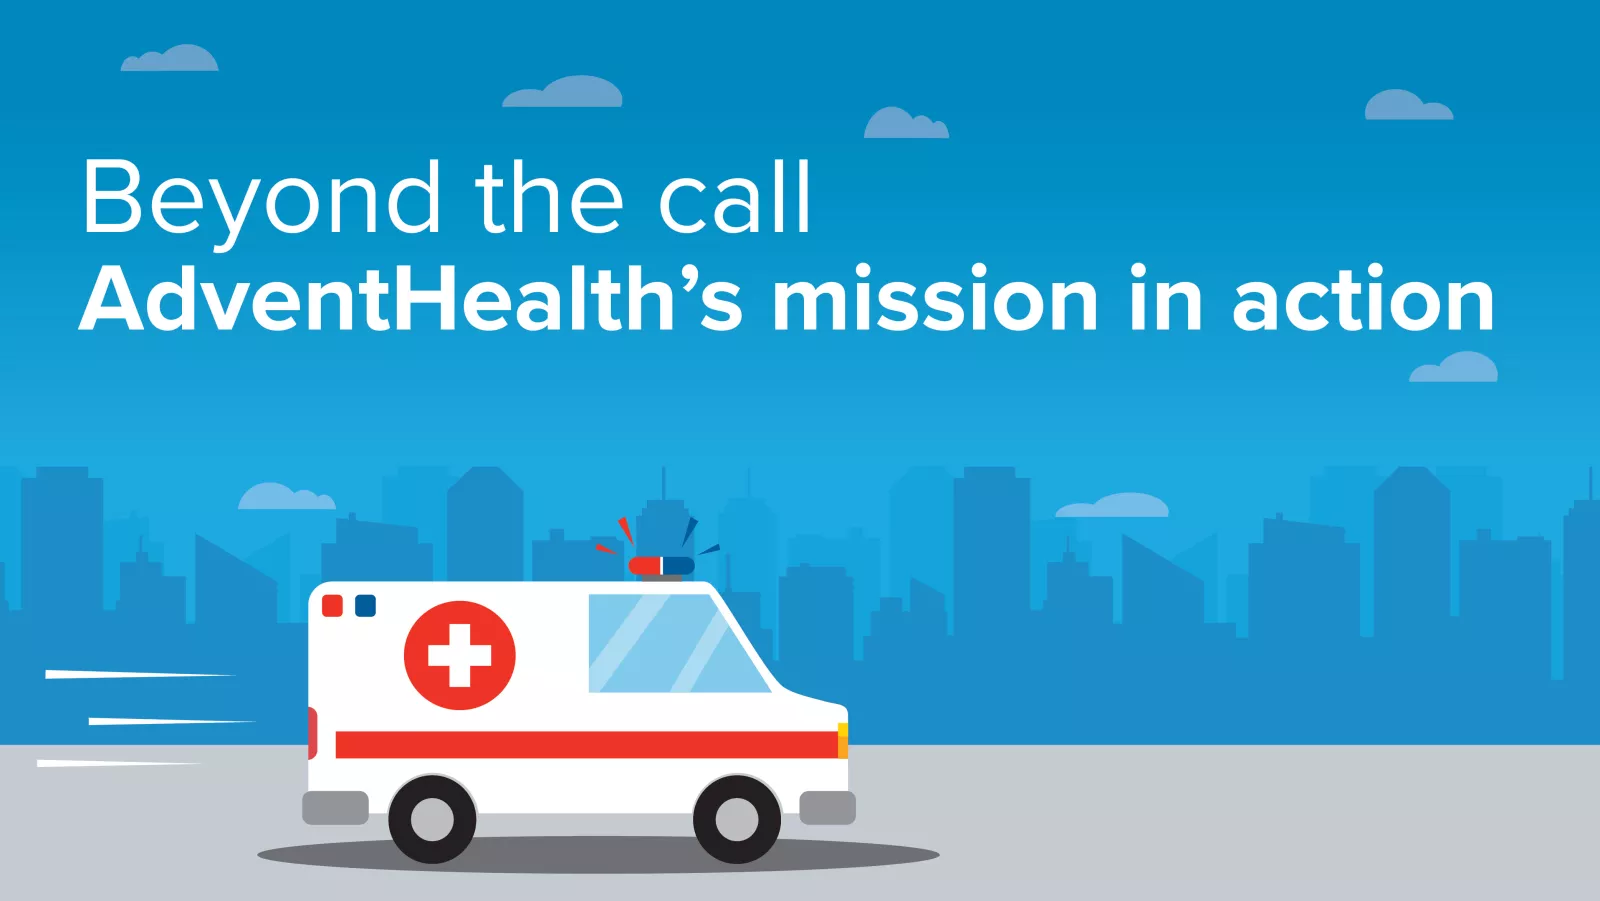 Beyond the call - AdventHealth's mission in action